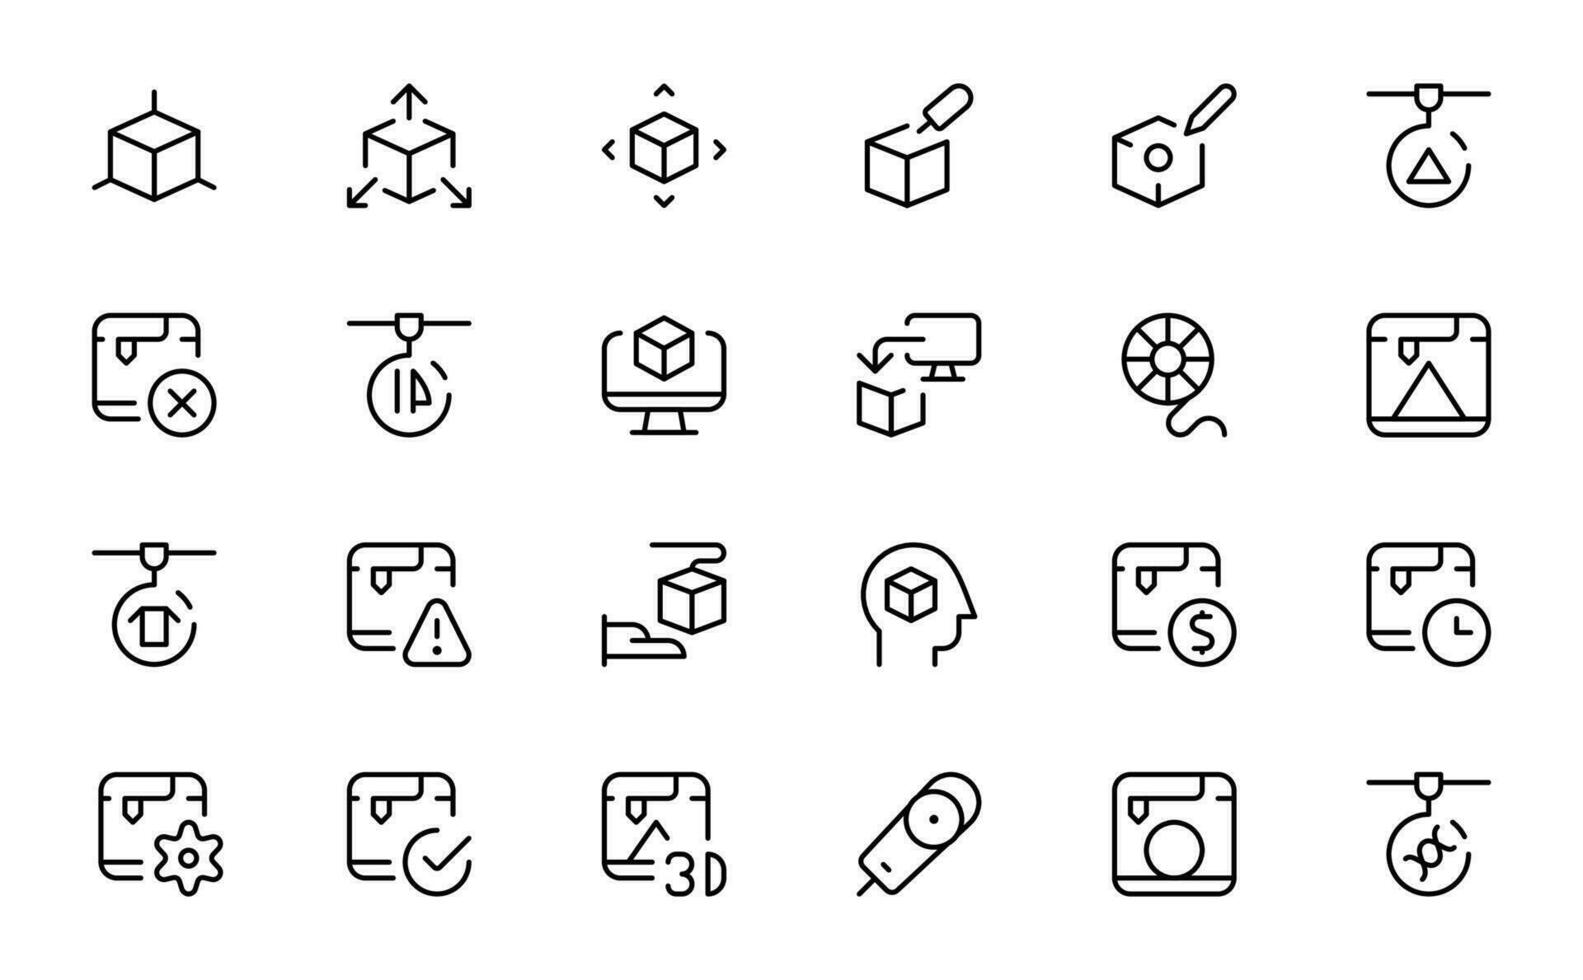 Engineering icon, Product Development and Creation. Such Line Signs as Prototyping, 3D printing, 3D Modeling, 3D Scanning. Vector Icons Set for Web, UI and App in Outline Editable Stroke.